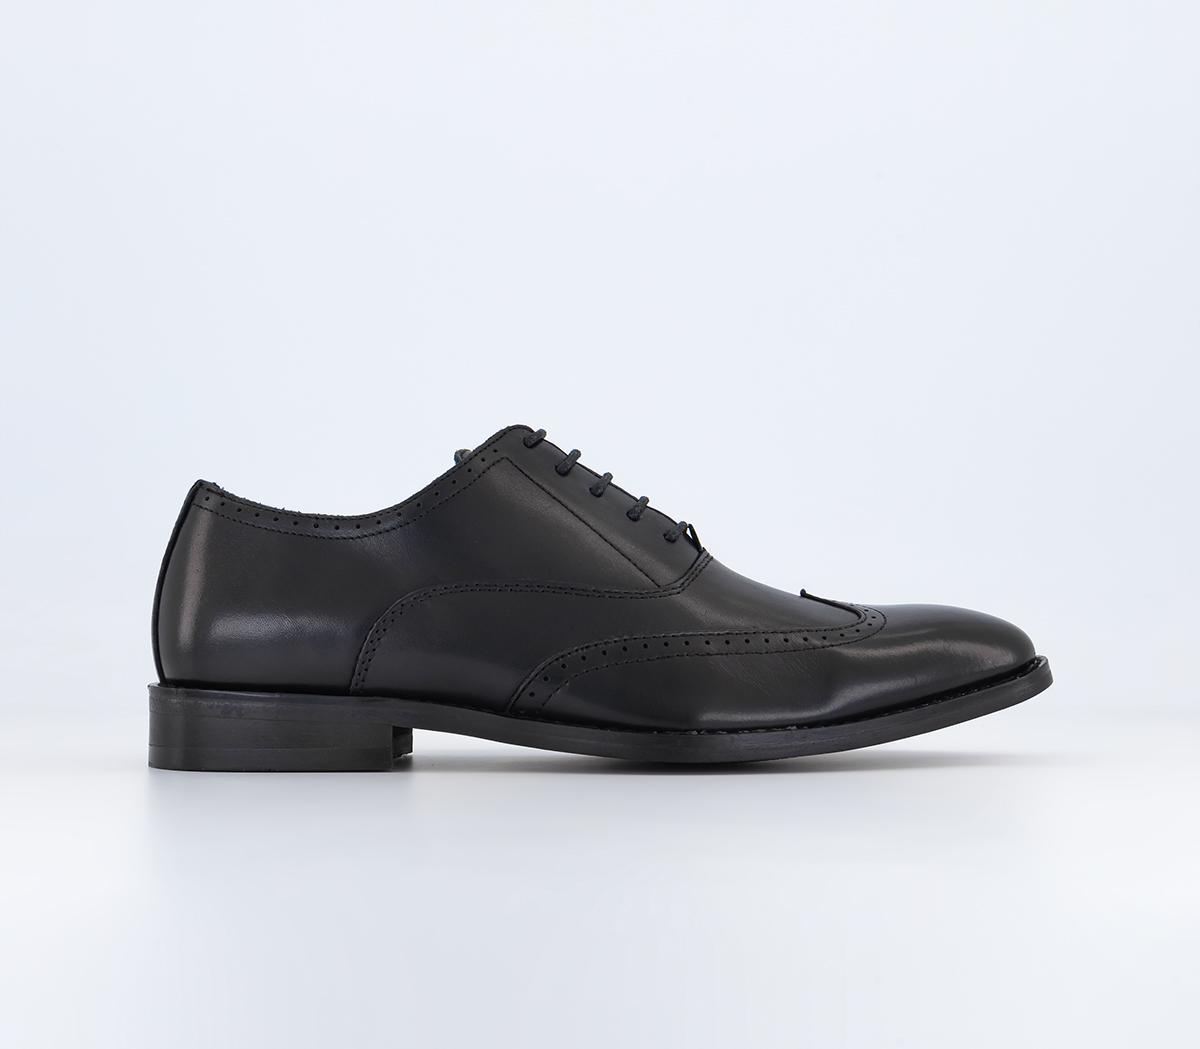 OFFICEMarshall Oxford Wingcap BroguesBlack Leather